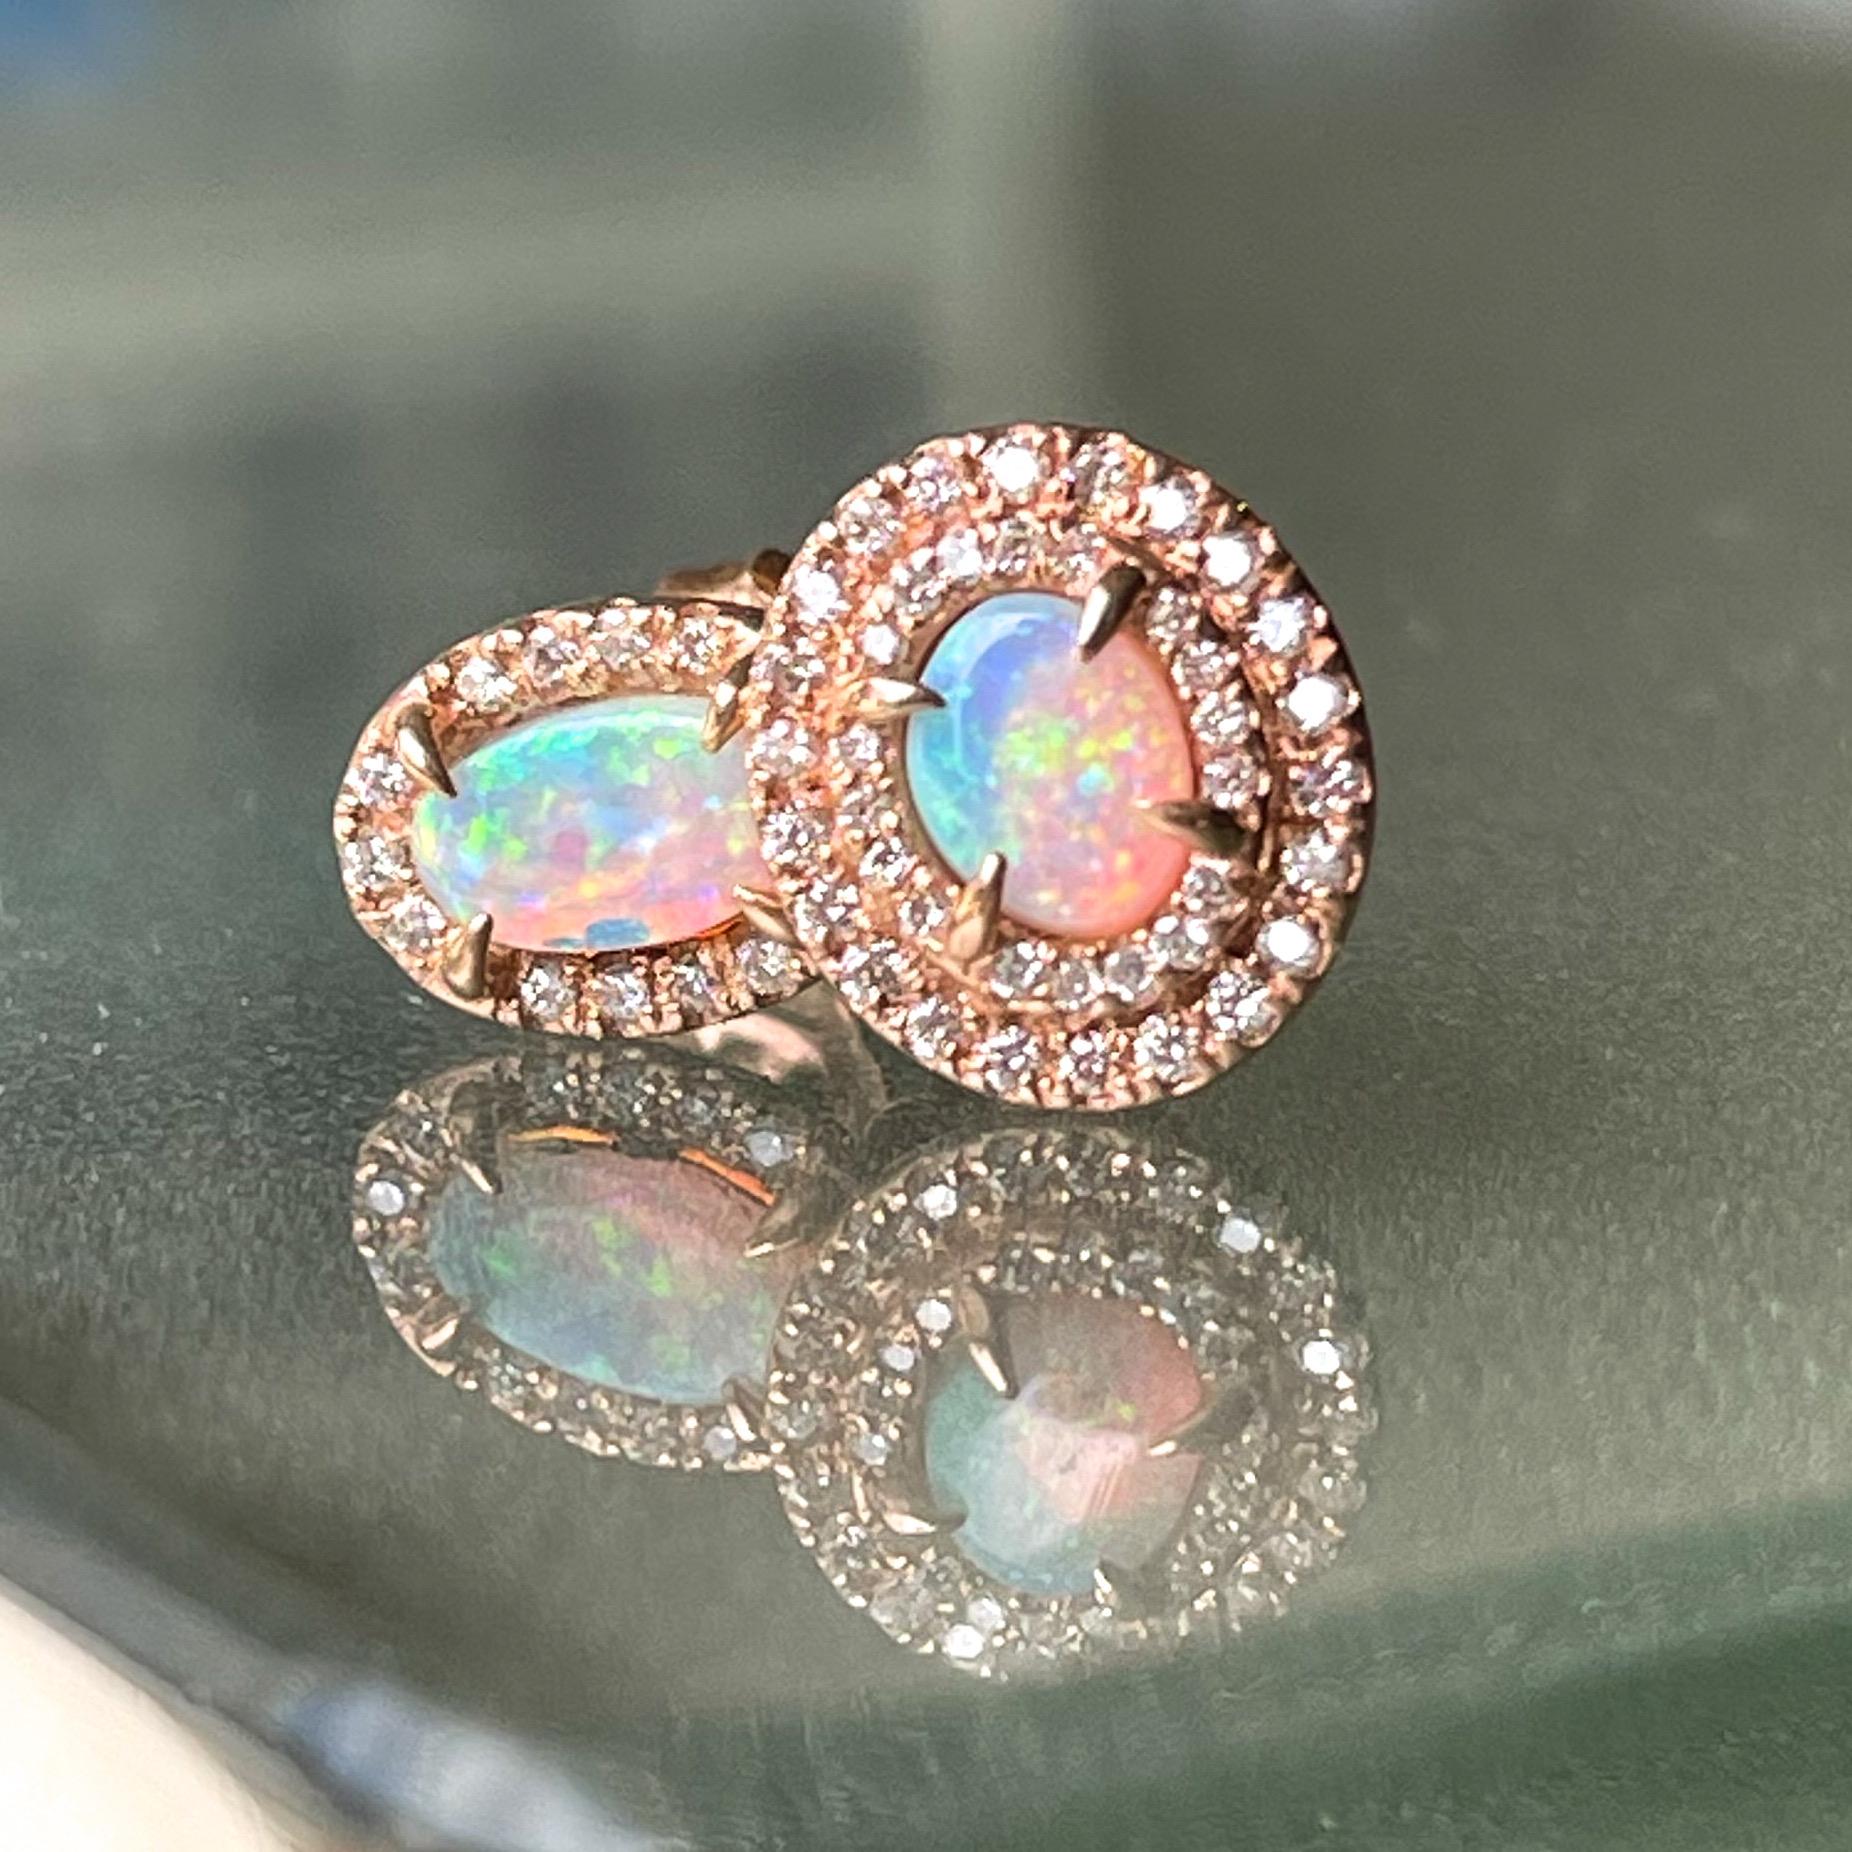 NIXIN Jewelry Reverie Australian Opal Earrings with Diamonds in Rose Gold In New Condition For Sale In Los Angeles, CA